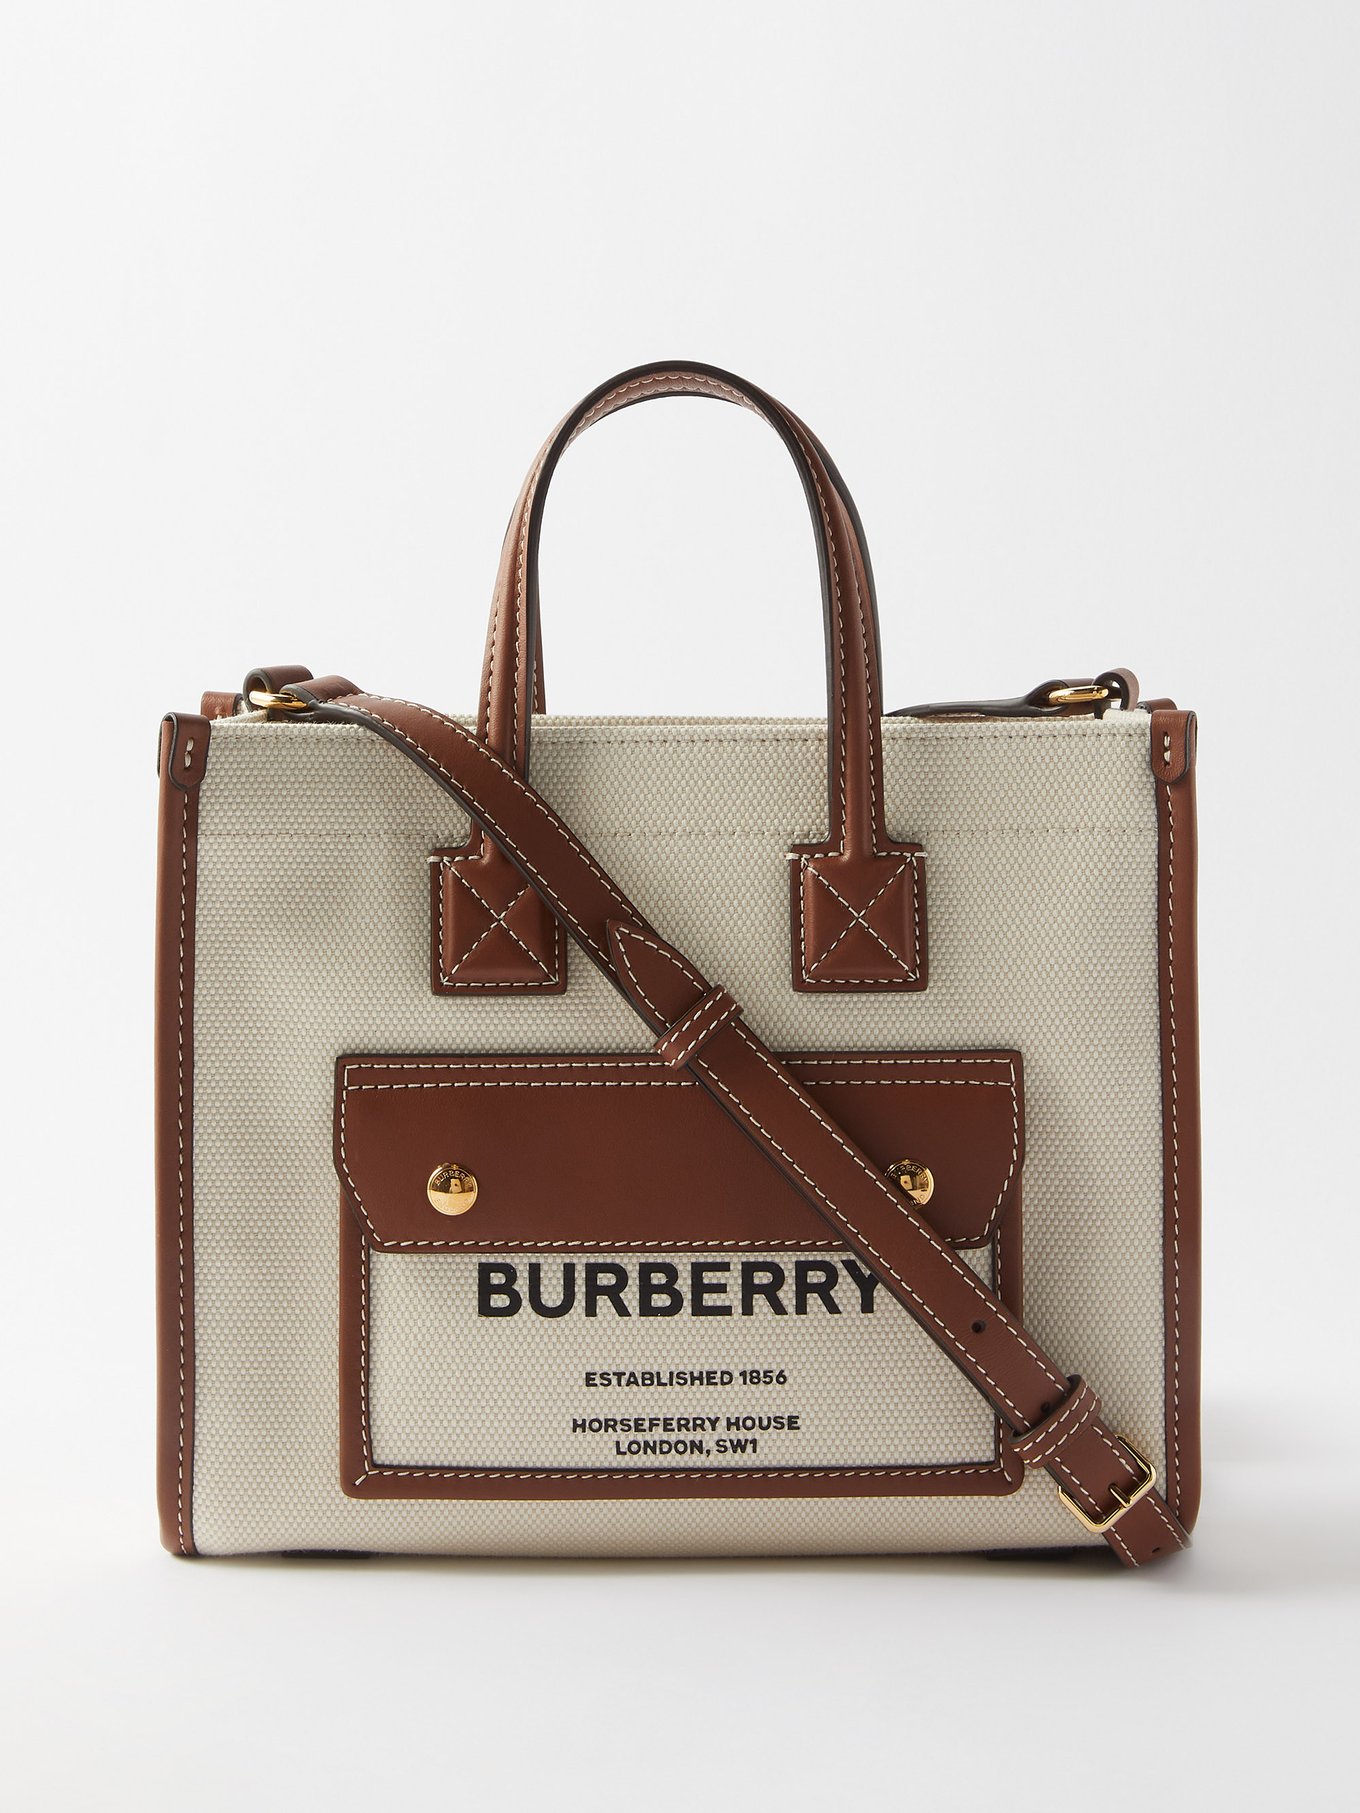 Burberry Pre-owned Women's Fabric Handbag - Brown - One Size